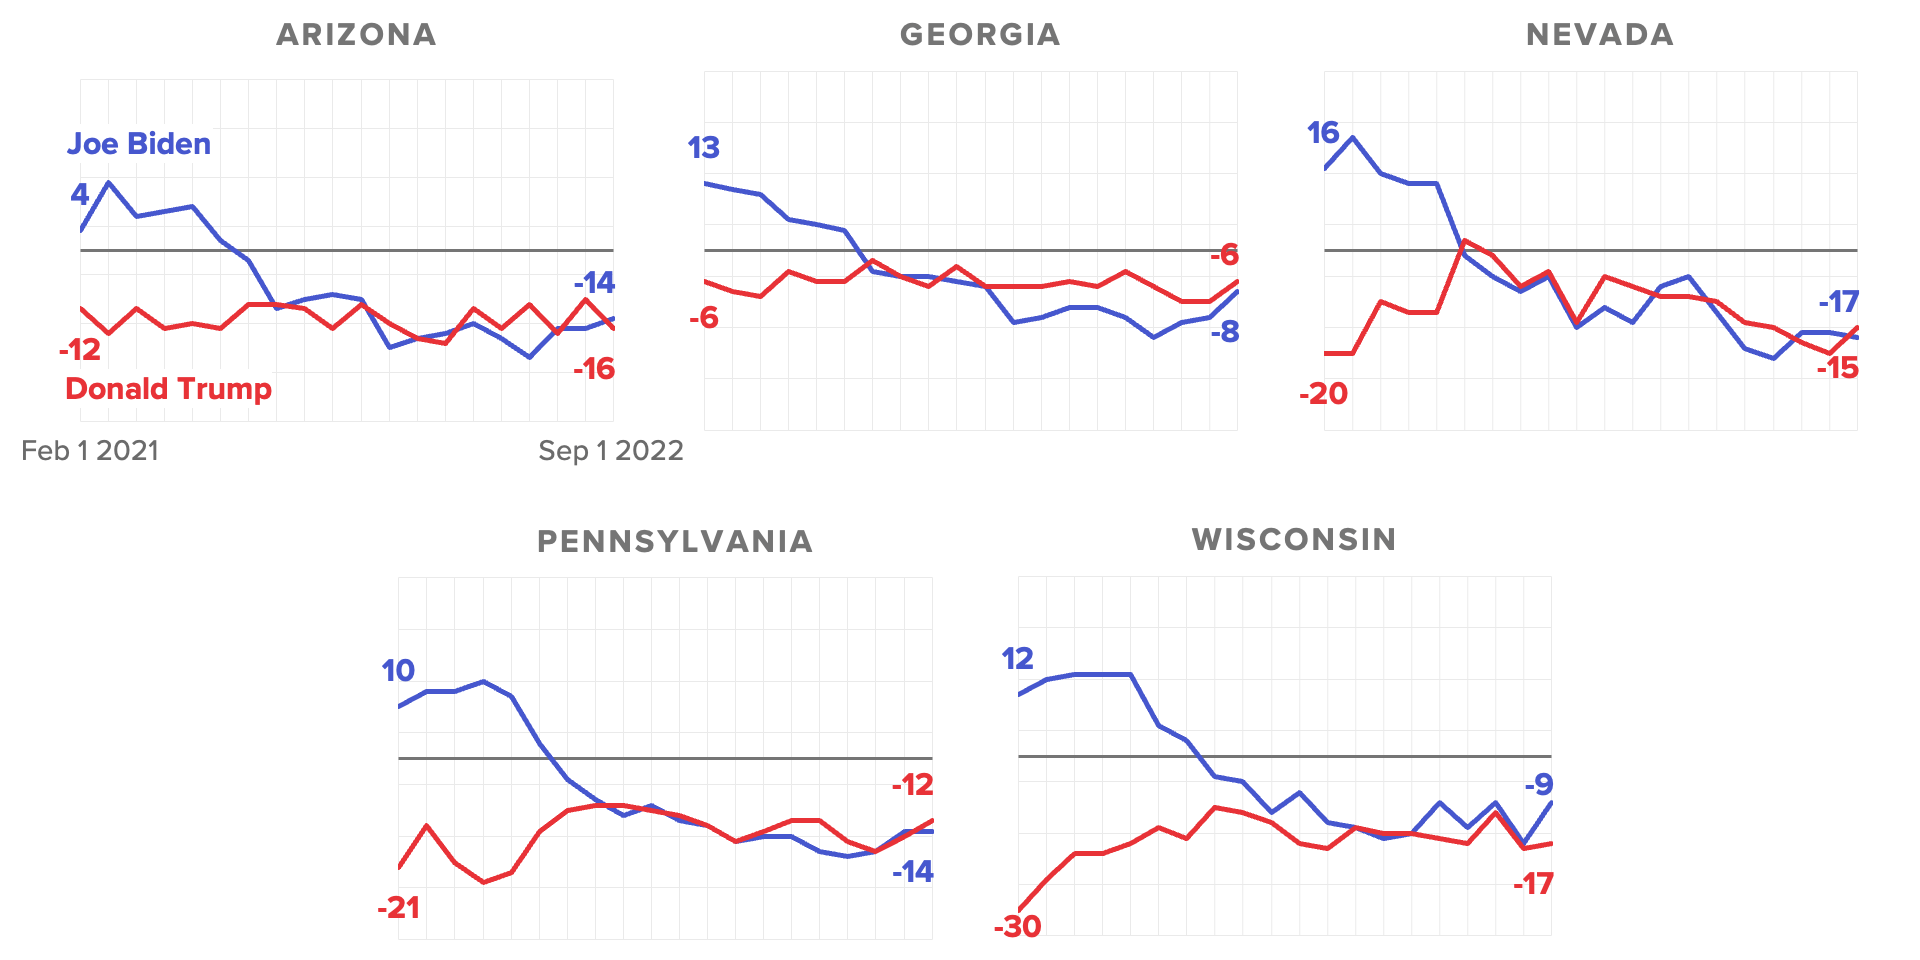 Trend lines of net favorability for President Biden and former President Trump in several key states.